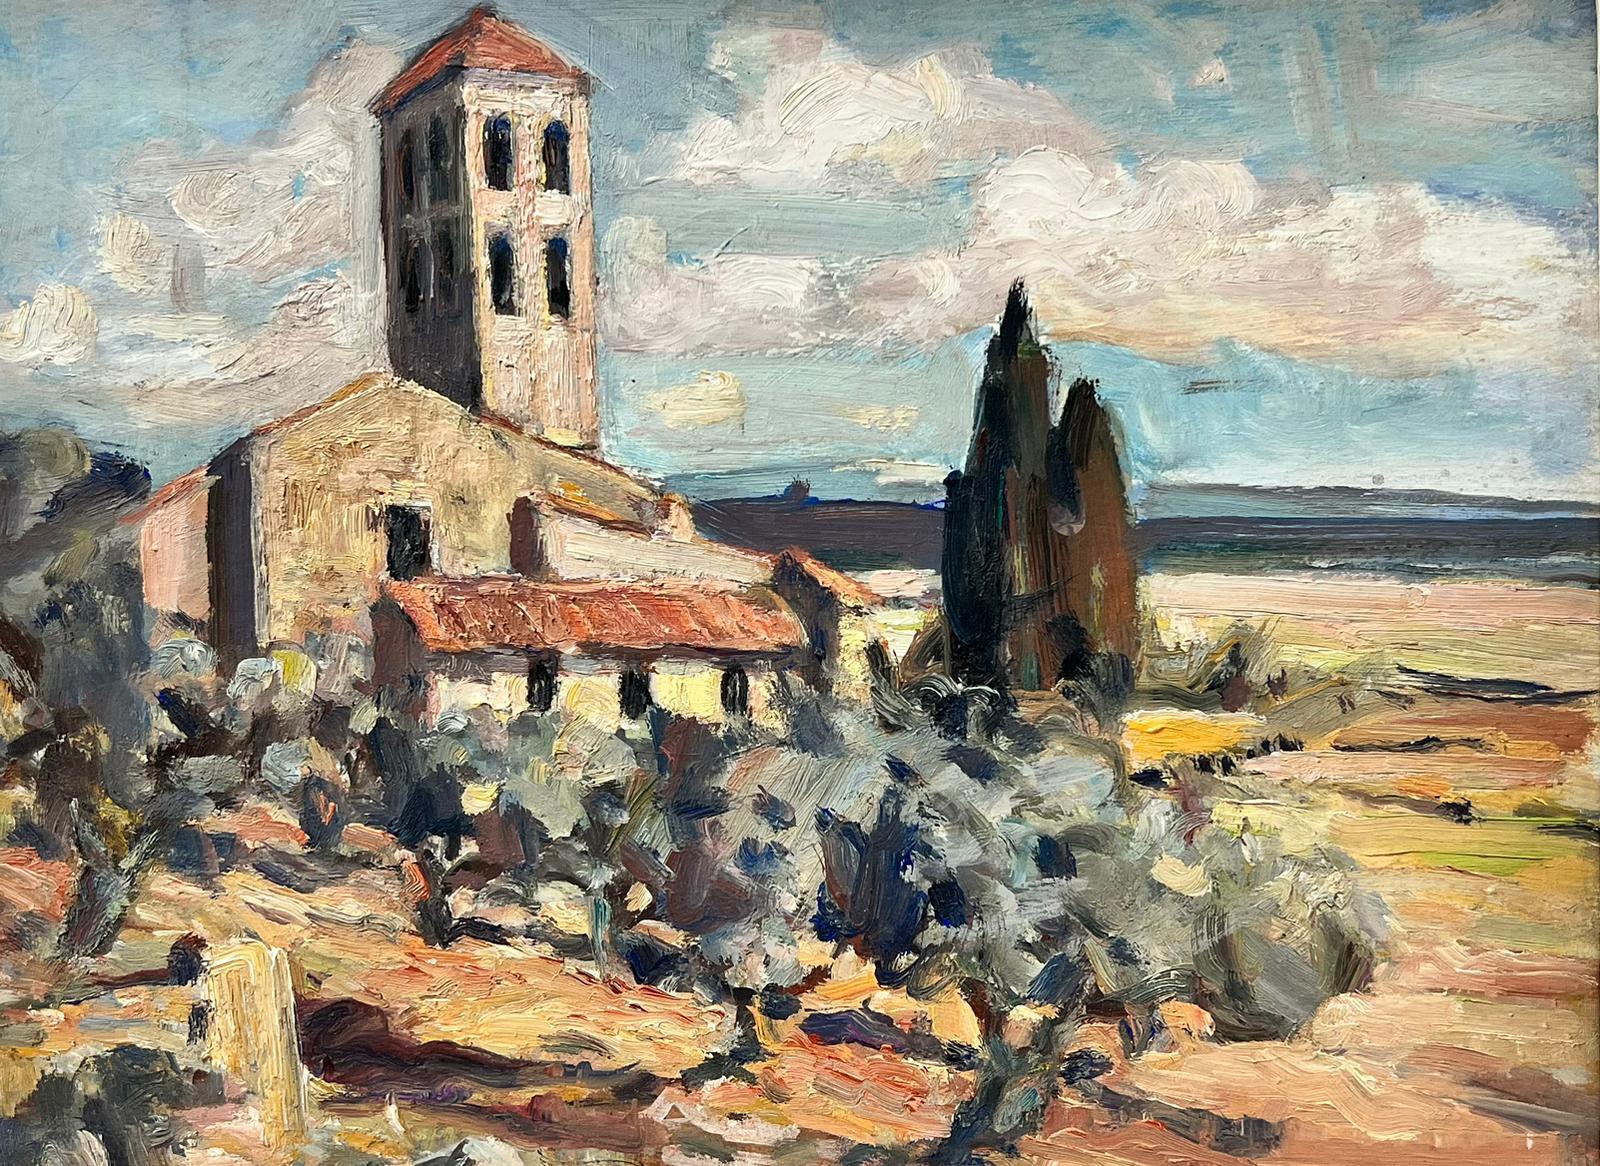 The Old Church in Provence
French Post-Impressionist School, circa 1950's
oil painting on board, framed in a Montparnasse style frame
framed: 16 x 20 inches
board: 10.5 x 14 inches
provenance: private collection, France
condition: very good and